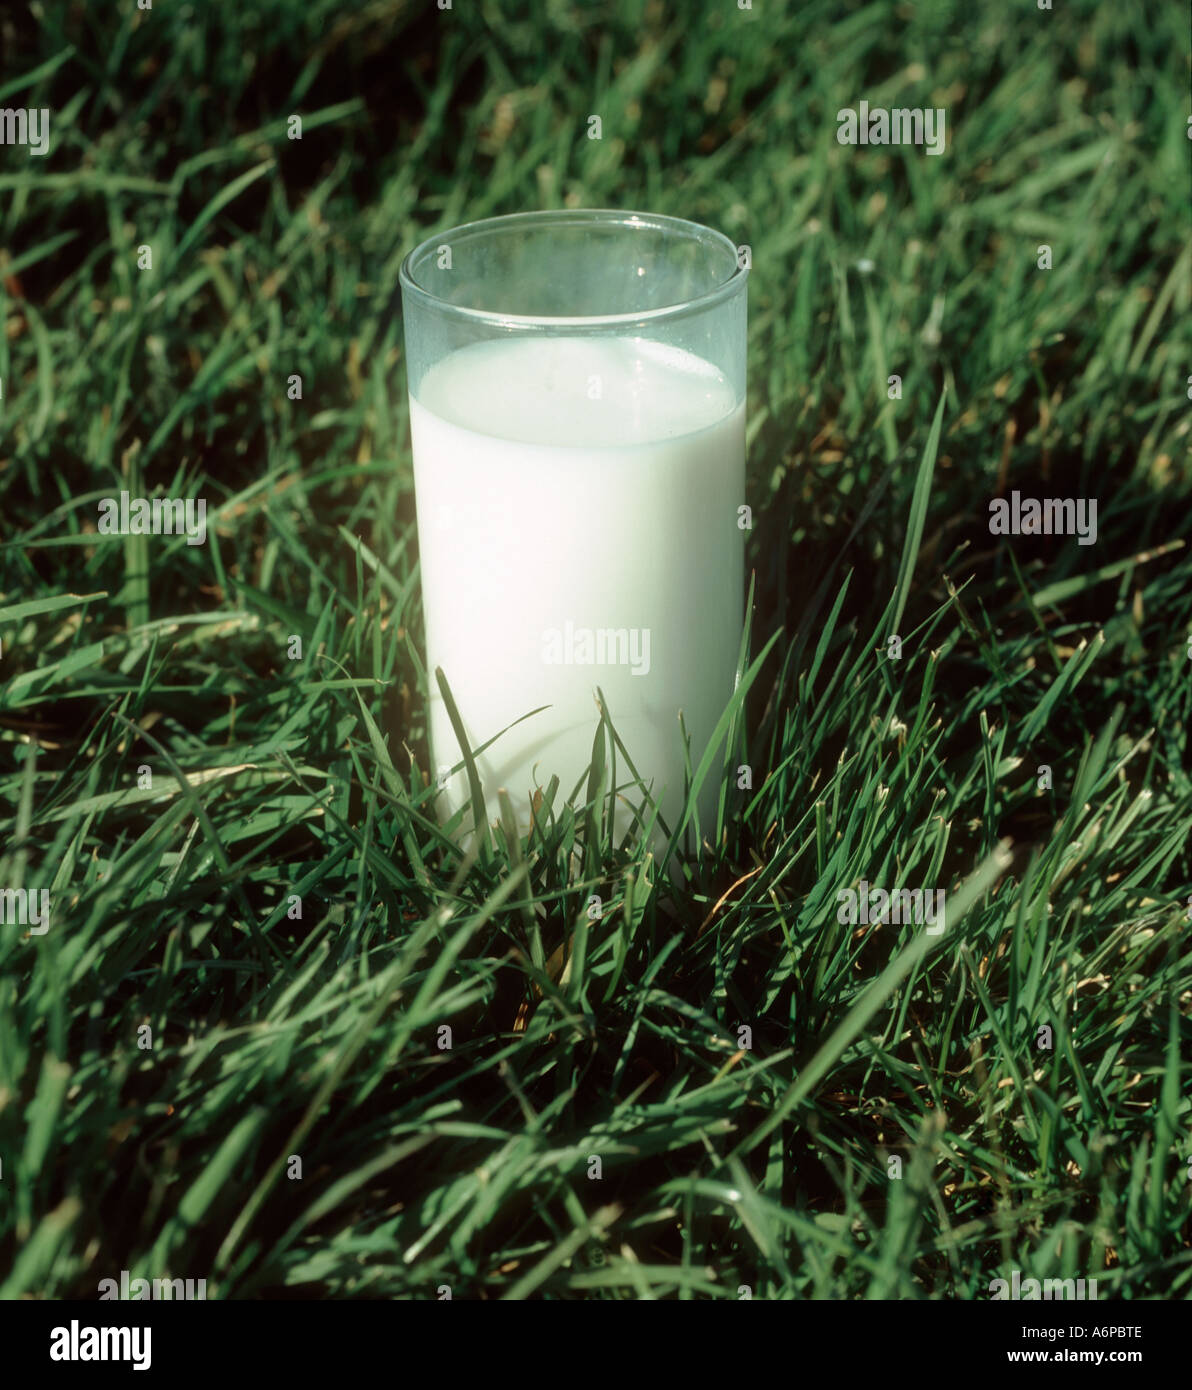 A glass of milk standing in grass pasture Stock Photo